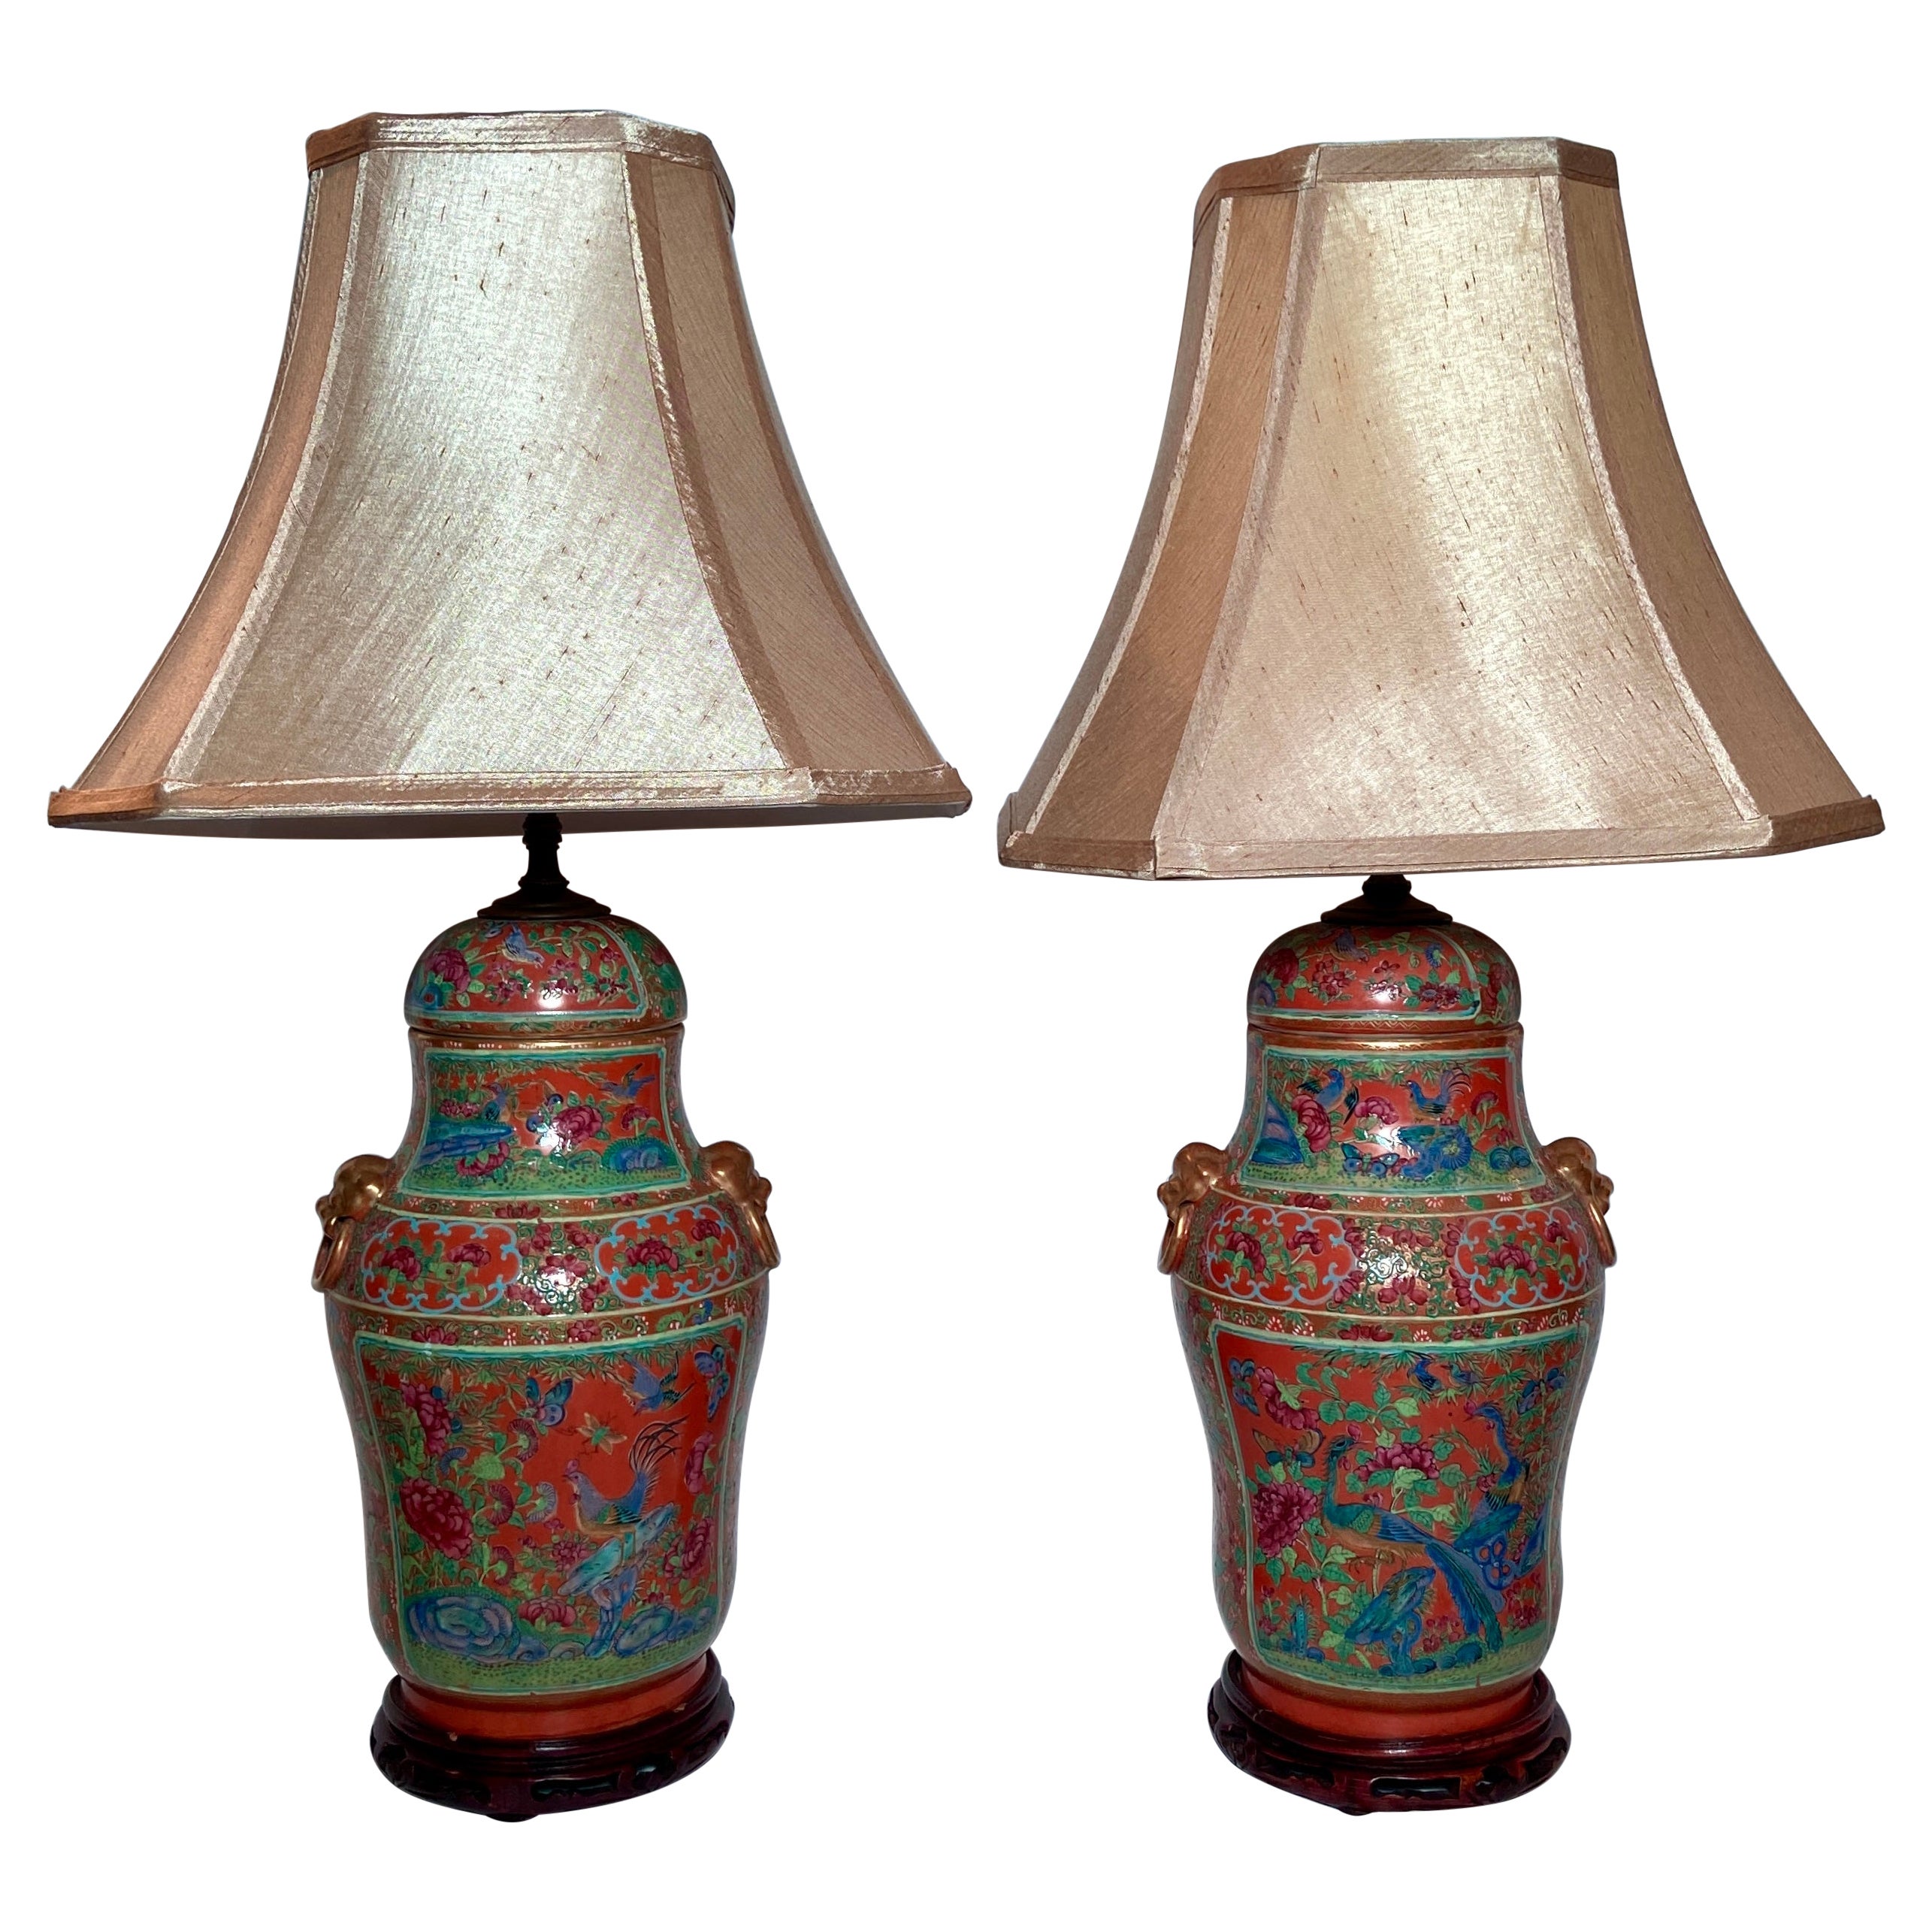 Pair Antique Chinese "Clobbered" Porcelain Covered Vases Made into Lamps.